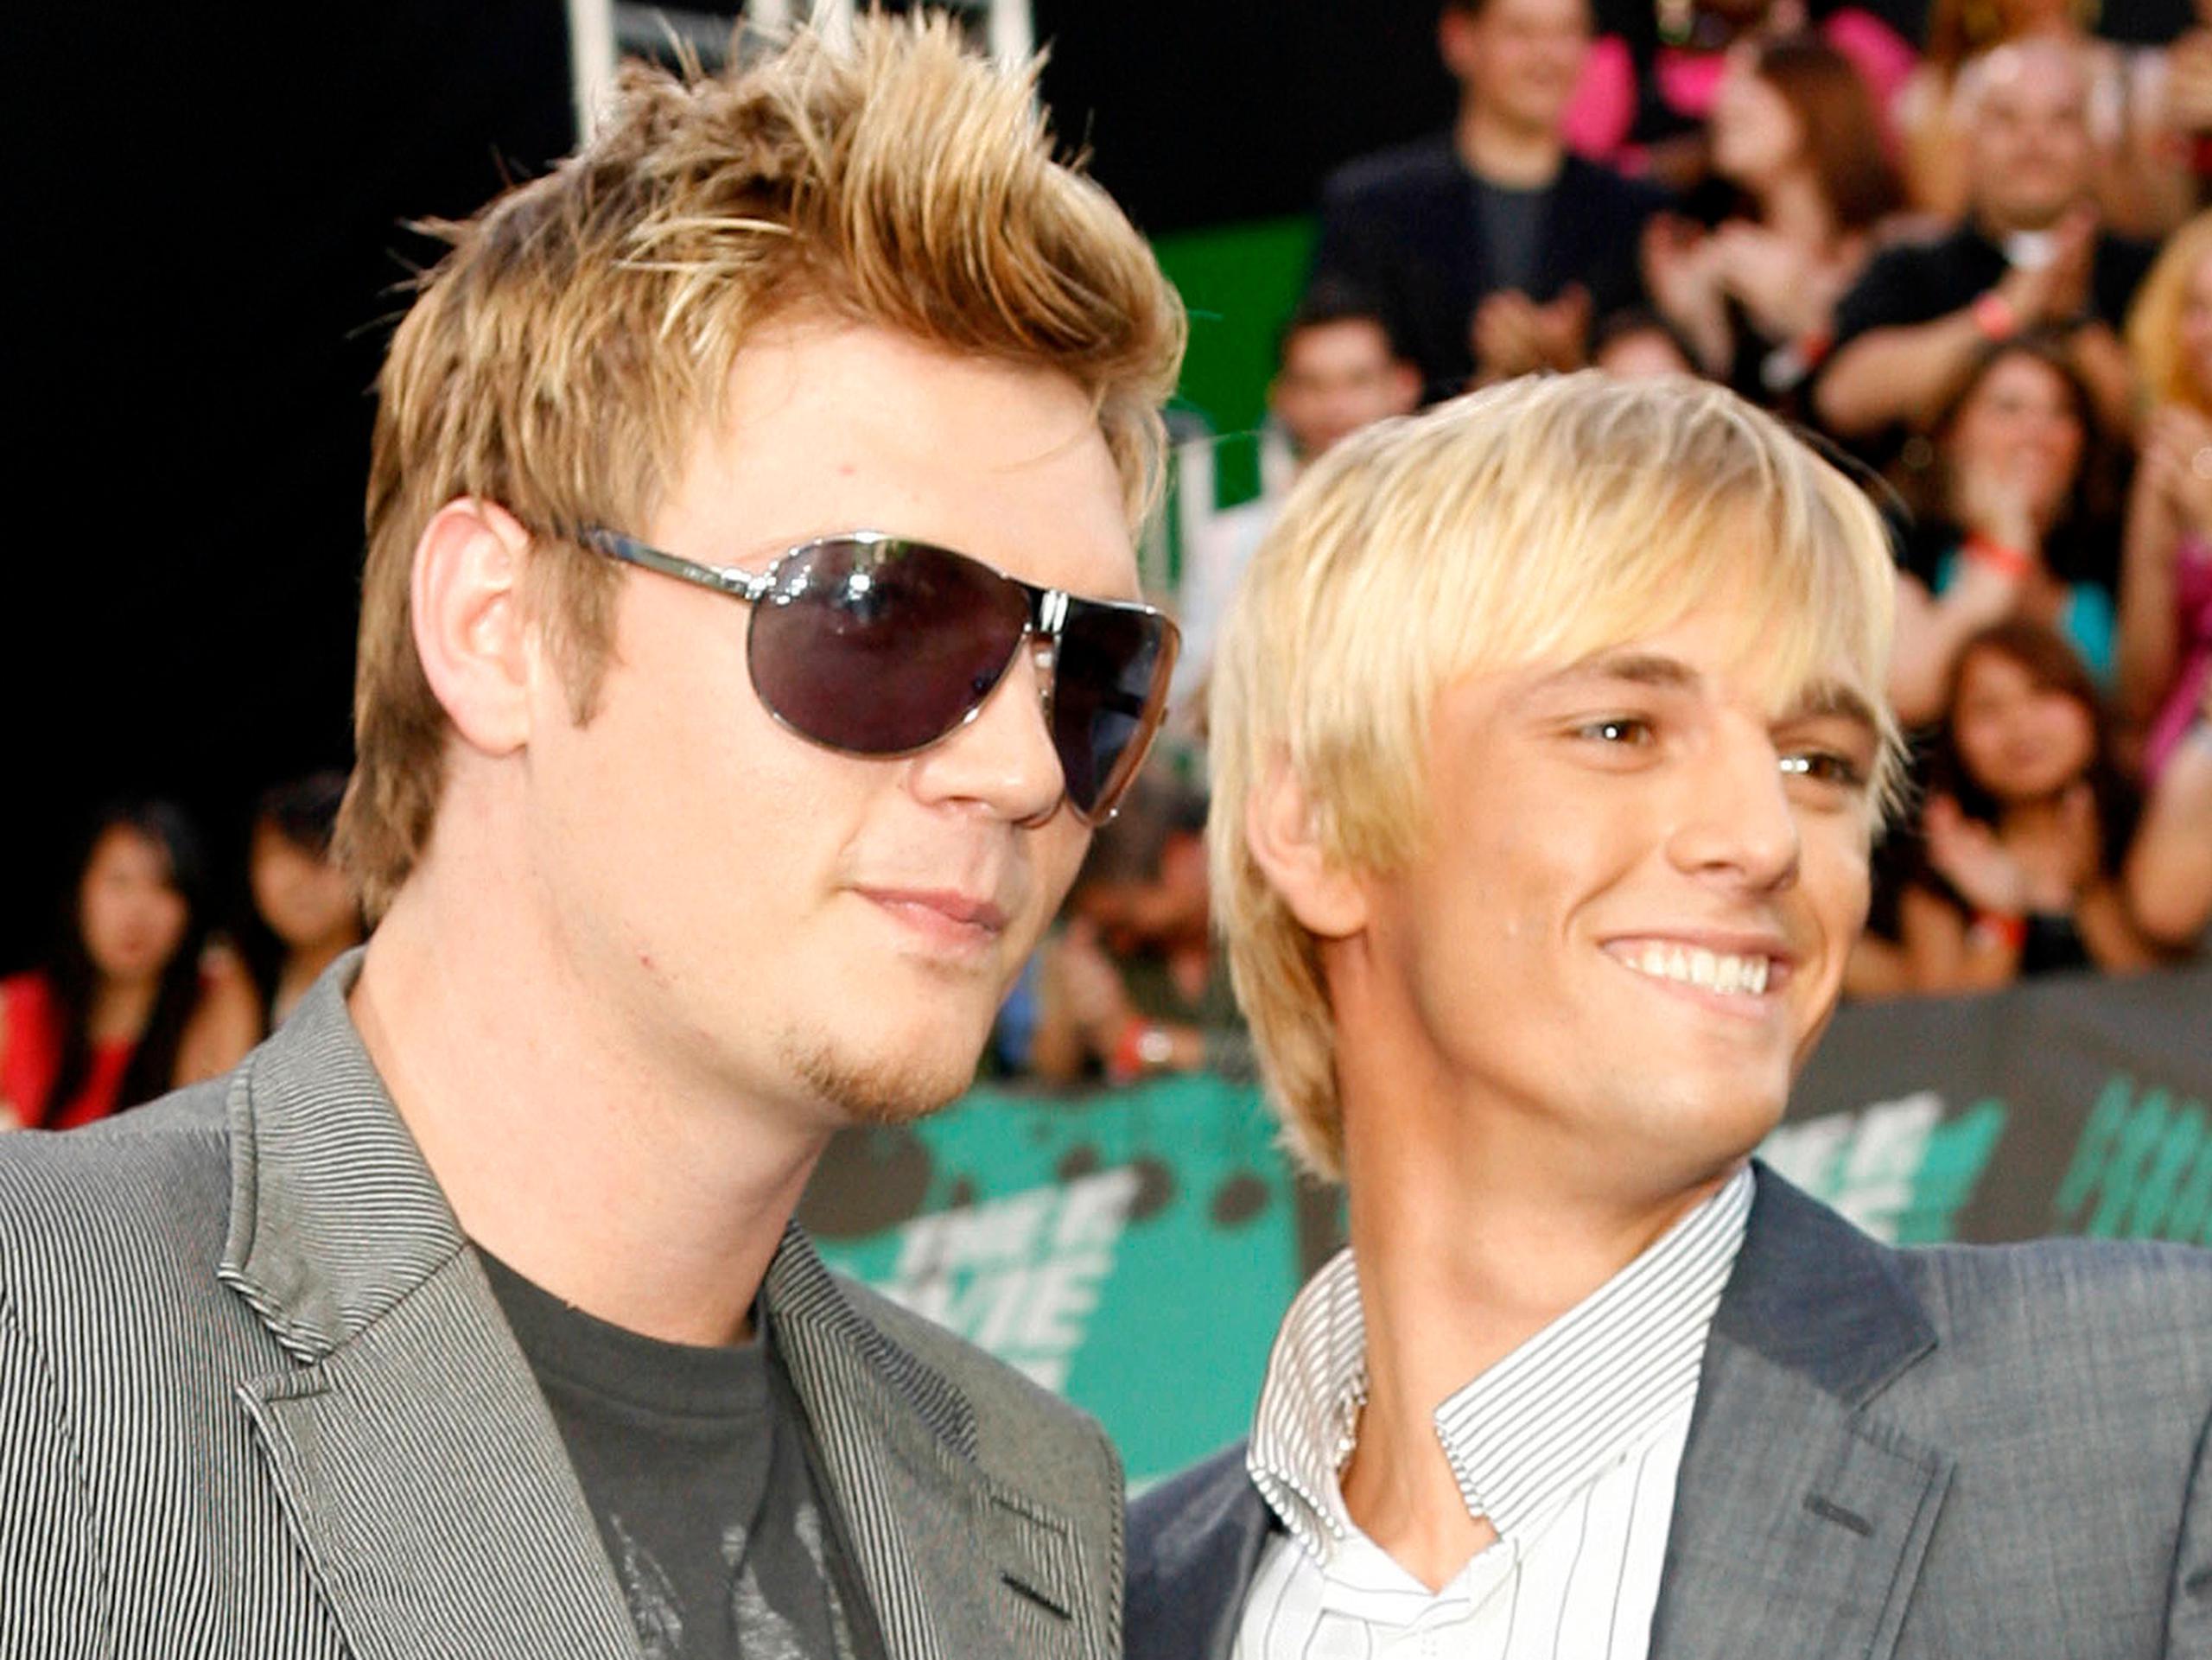 Singers Nick Carter, left, and Aaron Carter arrive for the 2006 MTV Movie Awards in Culver City, Calif., on Saturday, June 3, 2006.  (AP Photo/Matt Sayles)